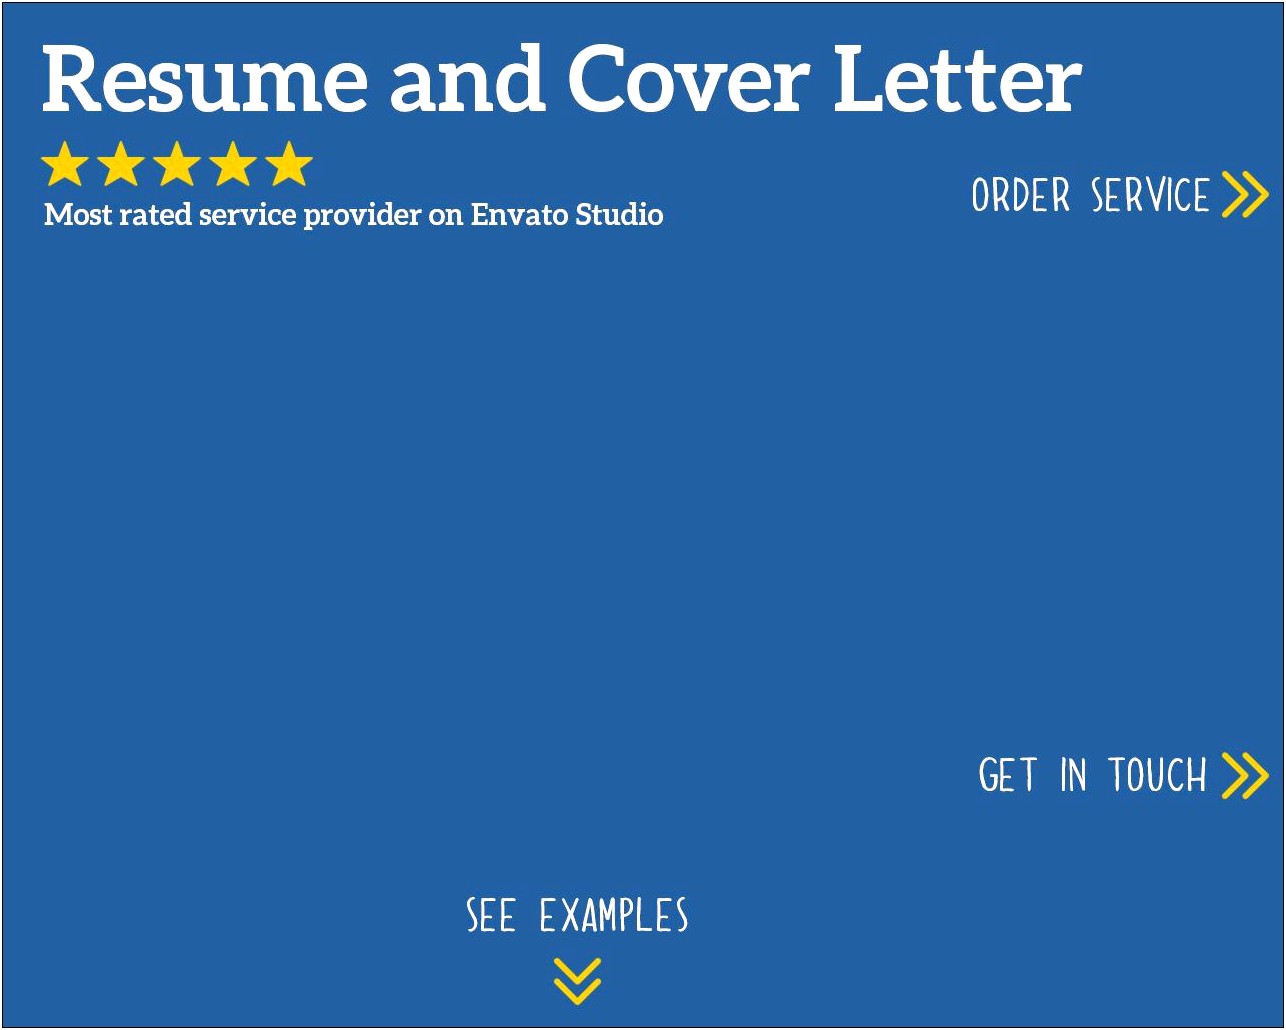 Executive Resume And Cover Letter Service